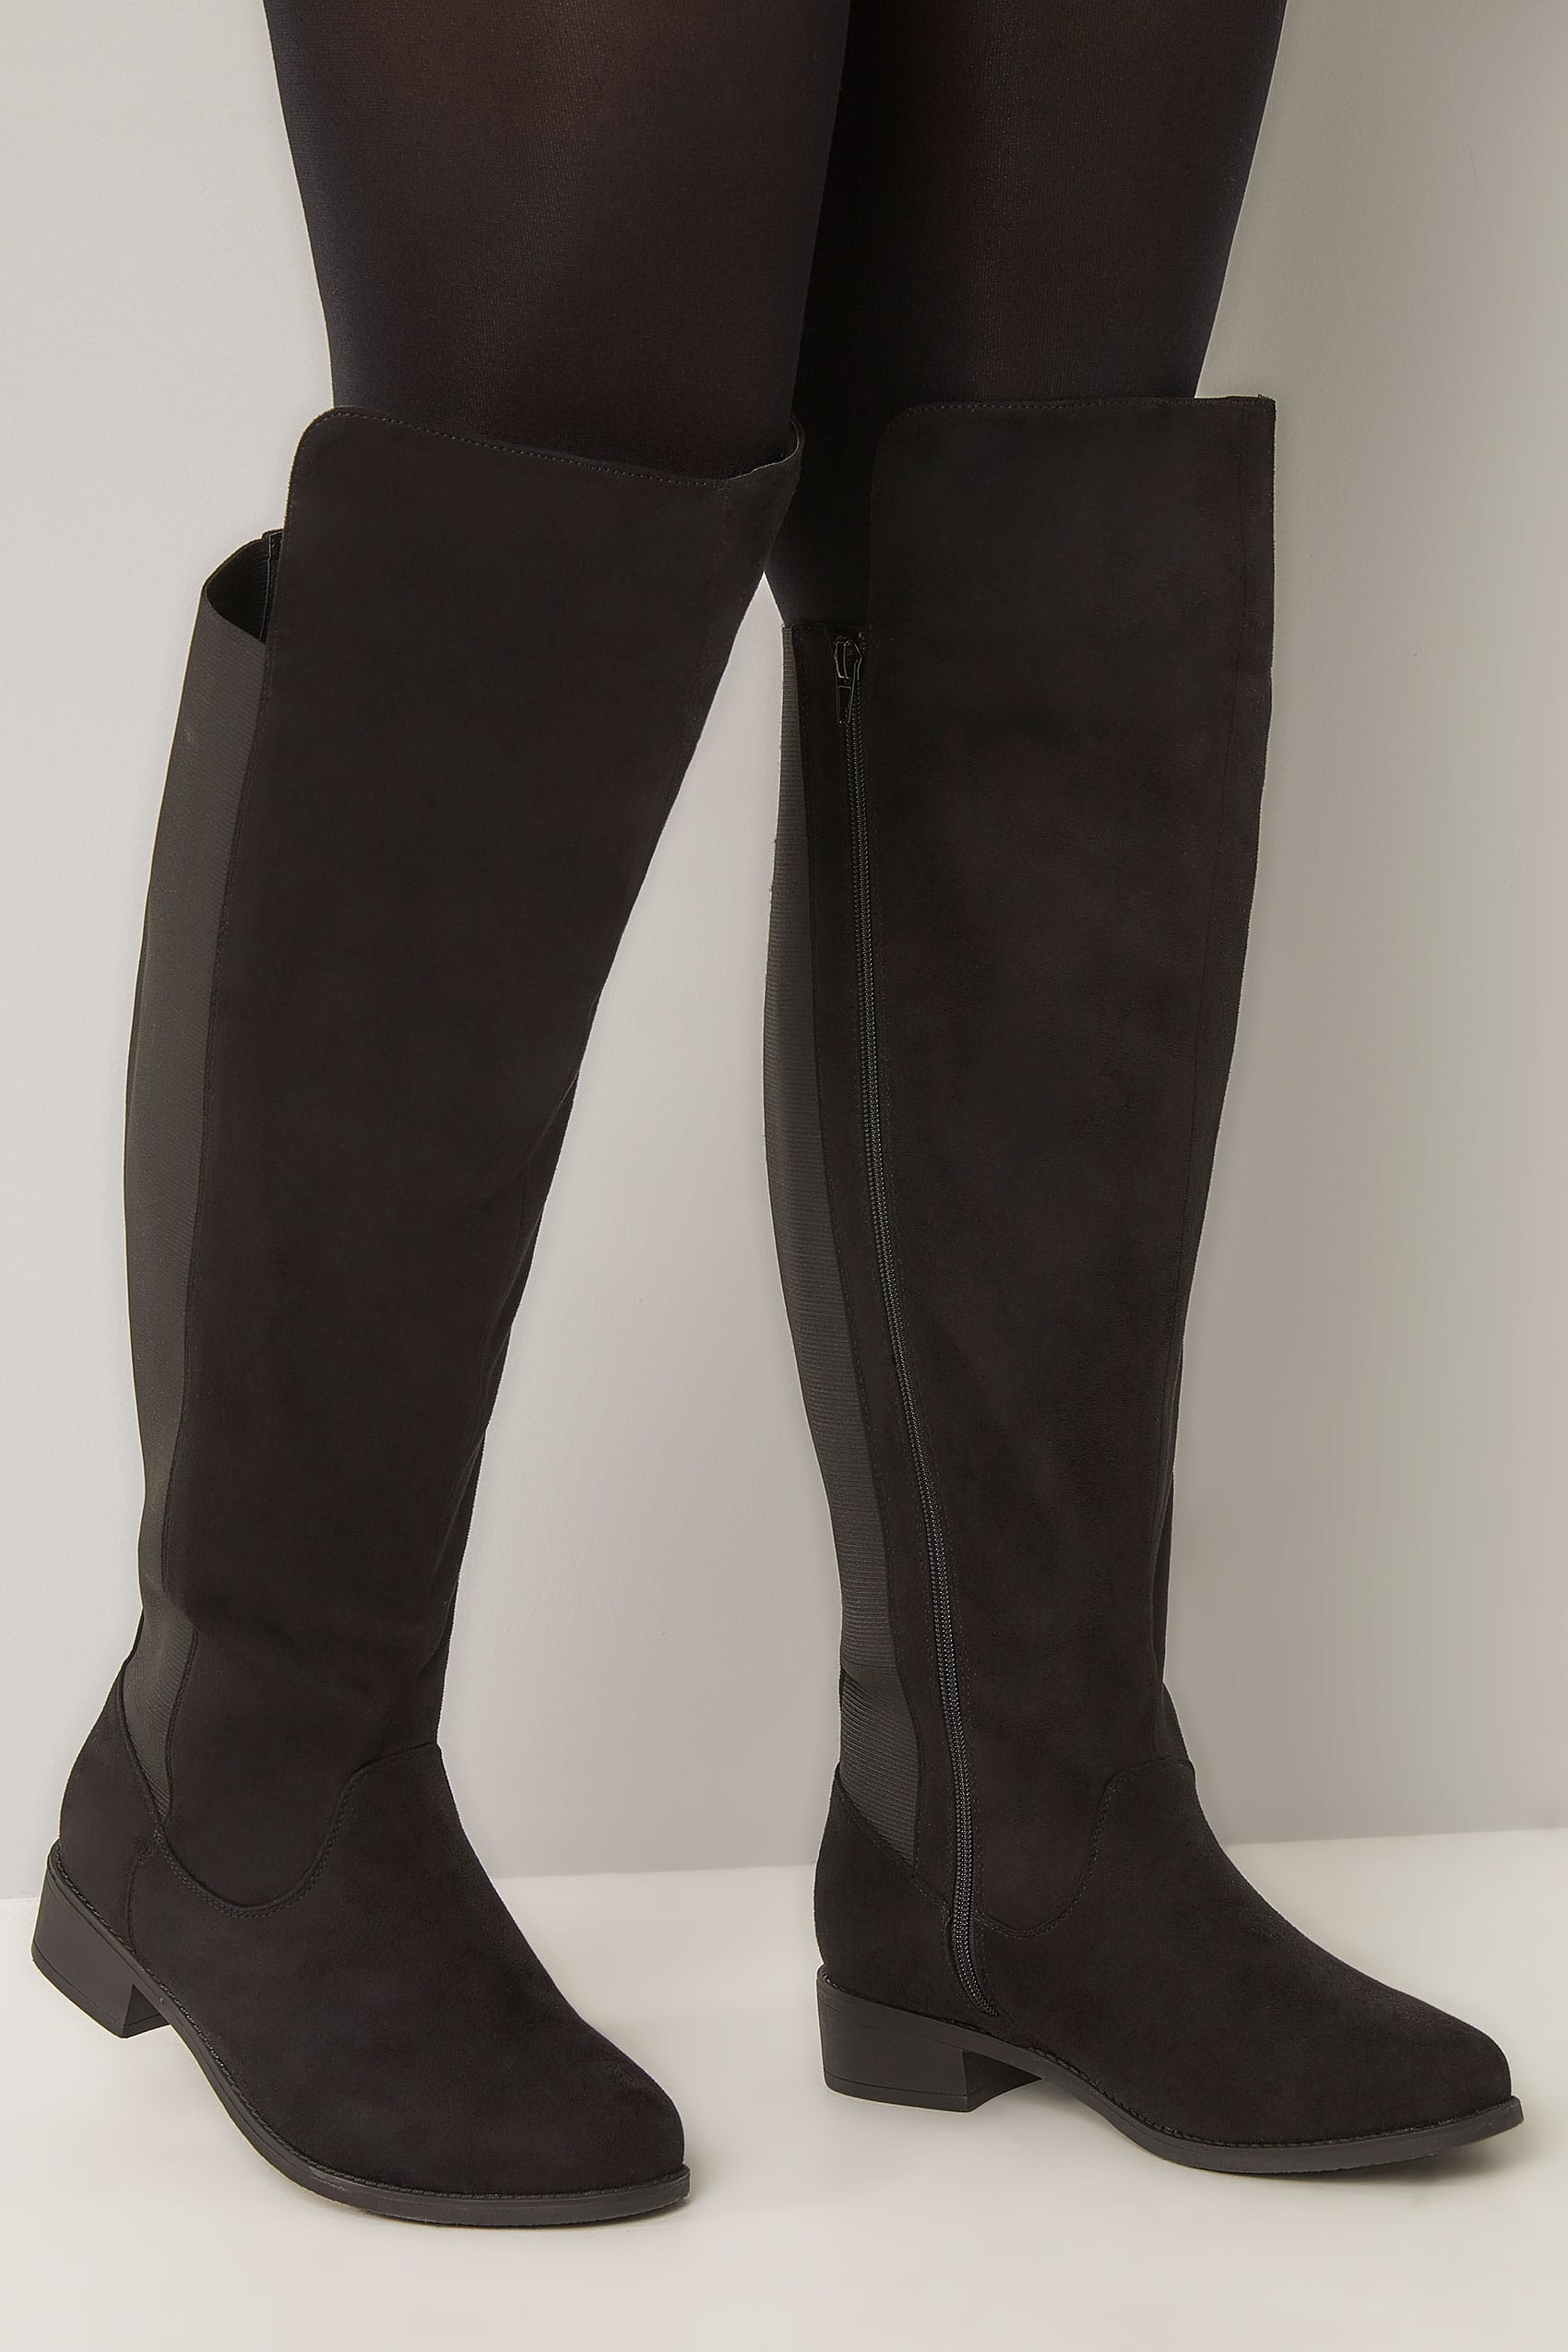 Black XL Calf Over The Knee Boots With Stretch Panel, Sizes 4EEE to 10EEE